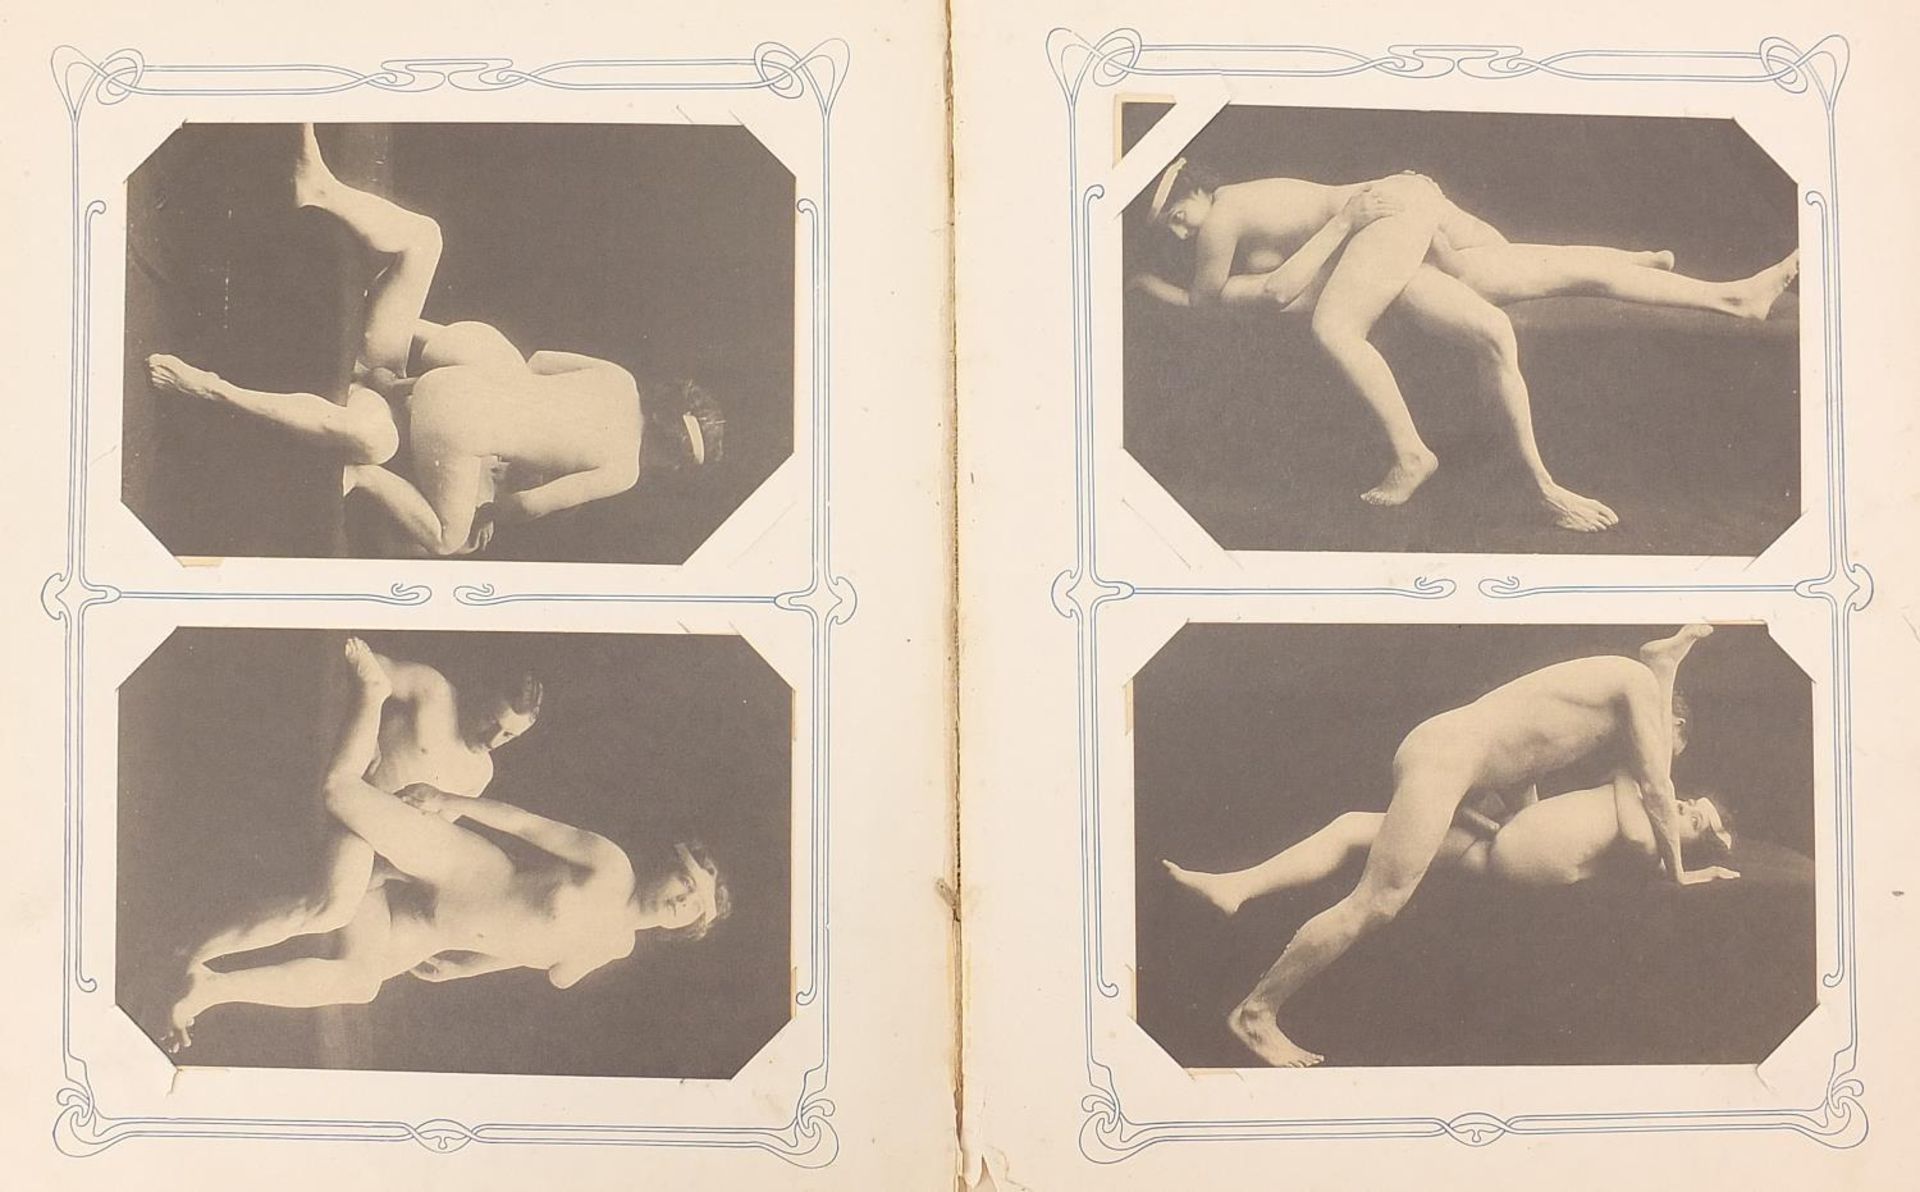 Collection of erotic and fetish postcards arranged in an album - Image 2 of 5